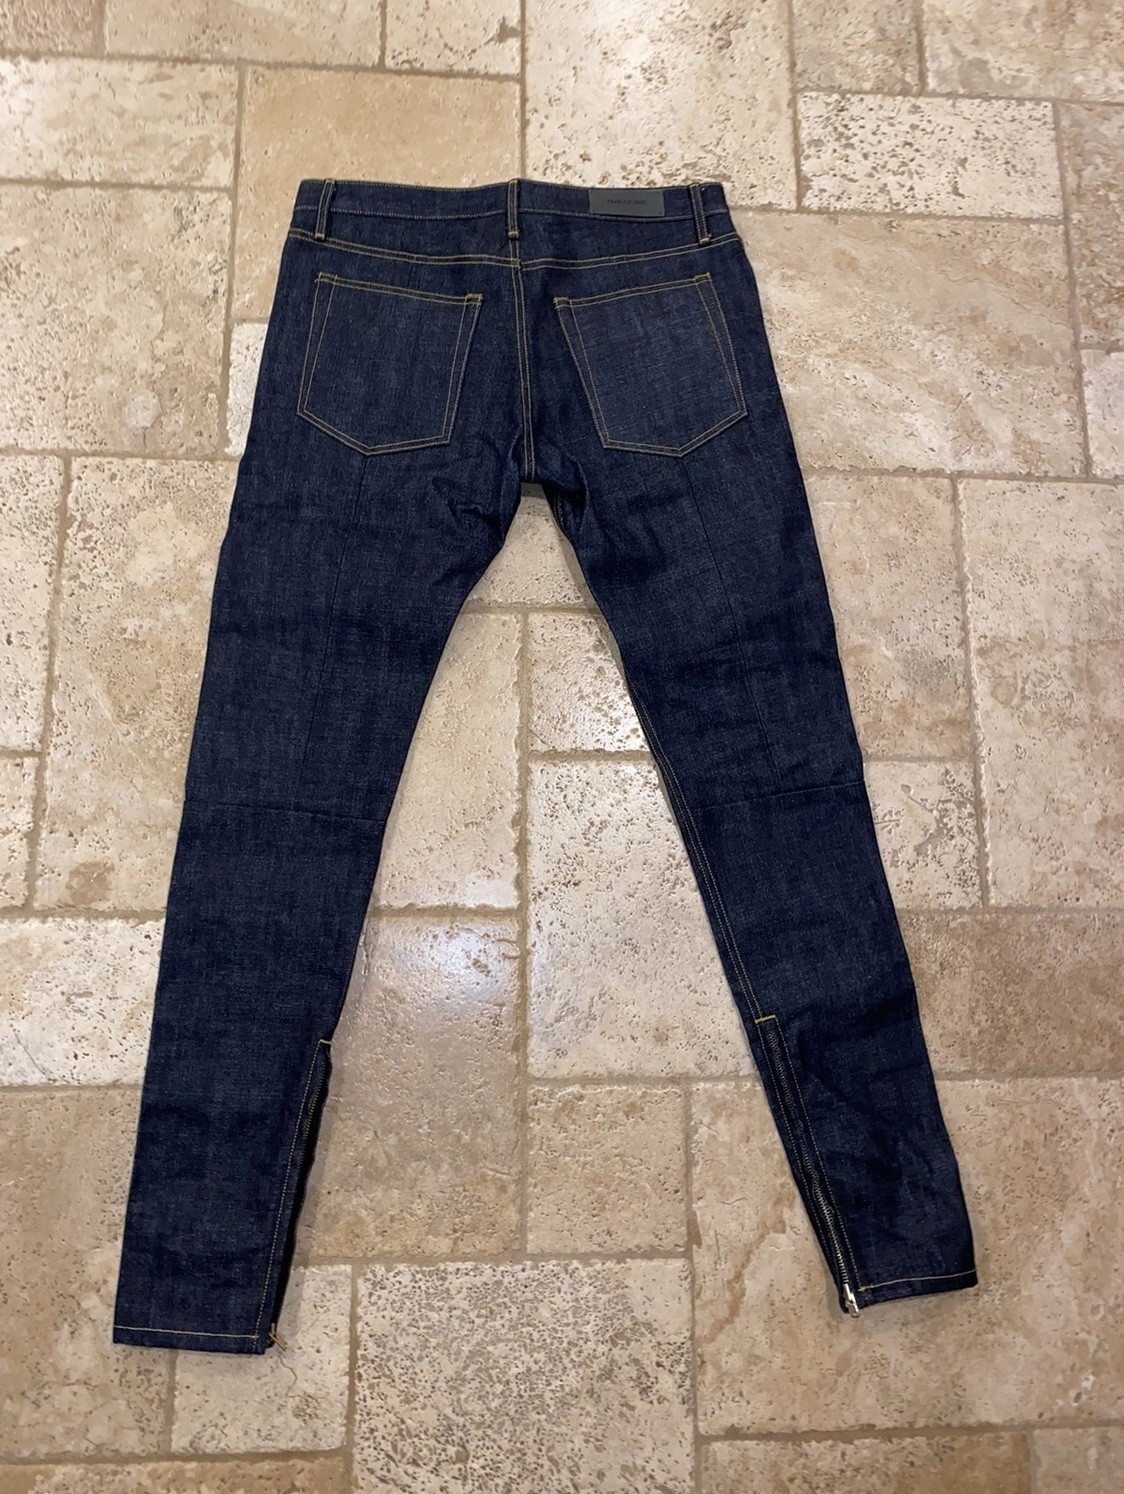 Fear of God Jeans Fifth Collection Paneled Raw Selvedge 34 - 8